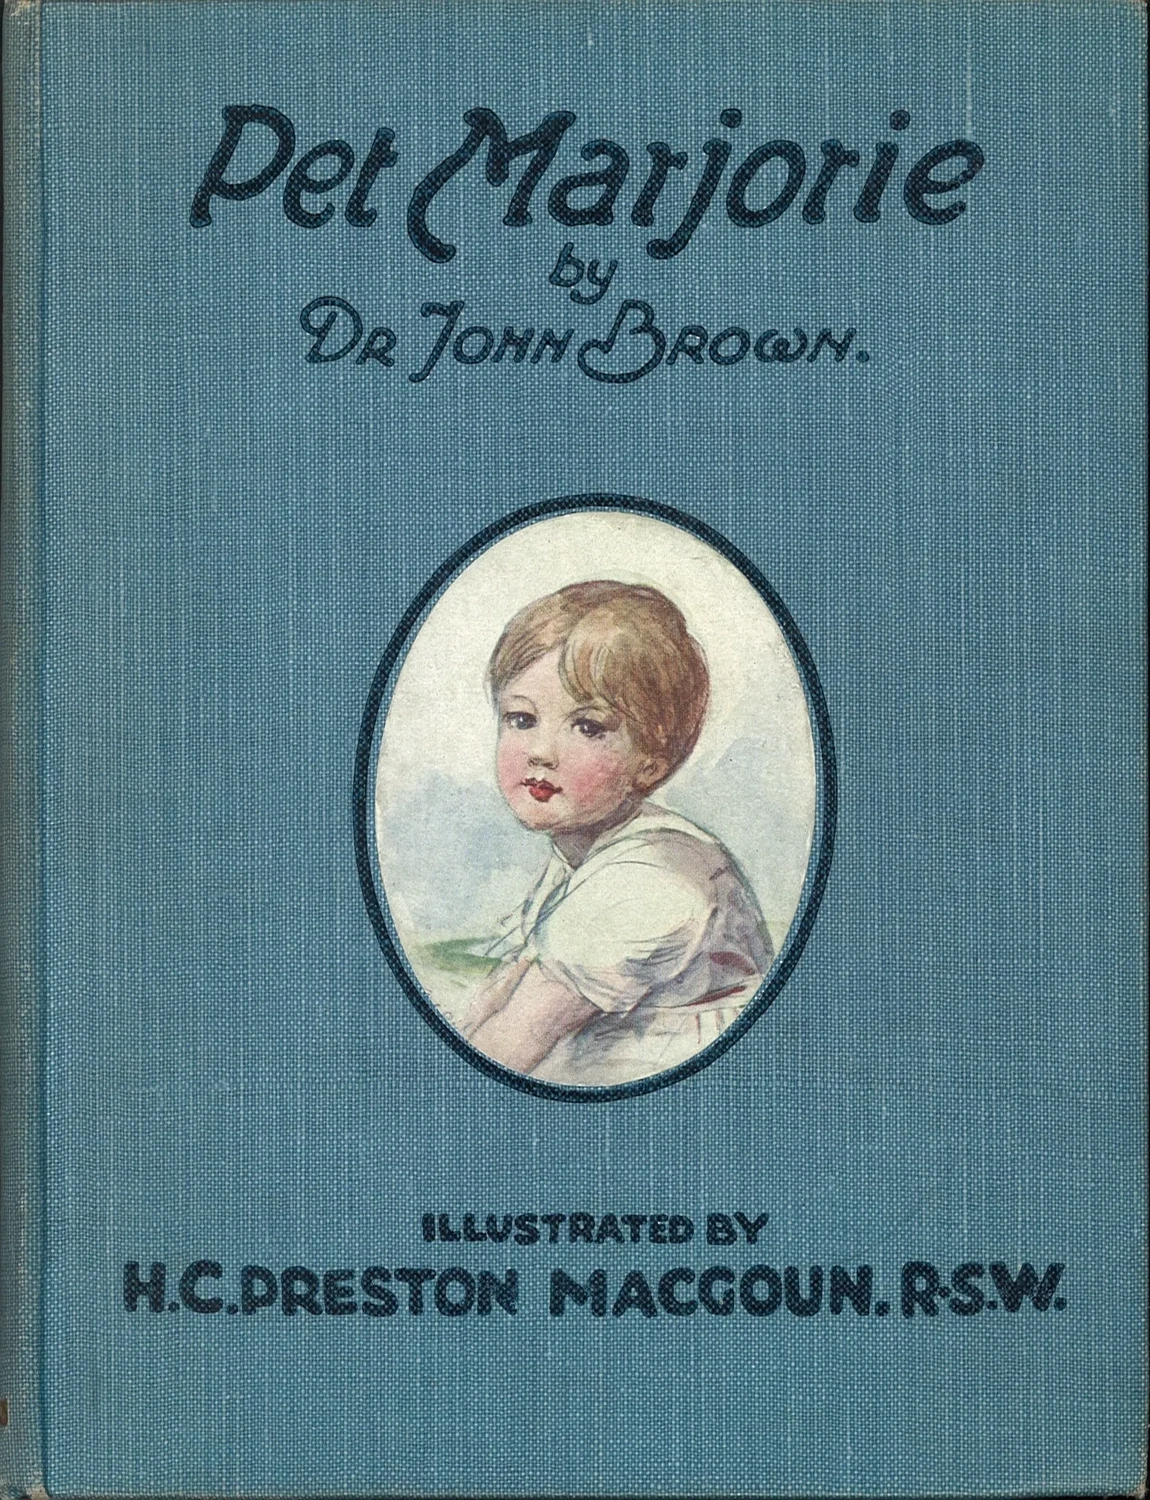 Pet Marjorie: A Story of Child Life Fifty Year Ago, Dr. John Brown